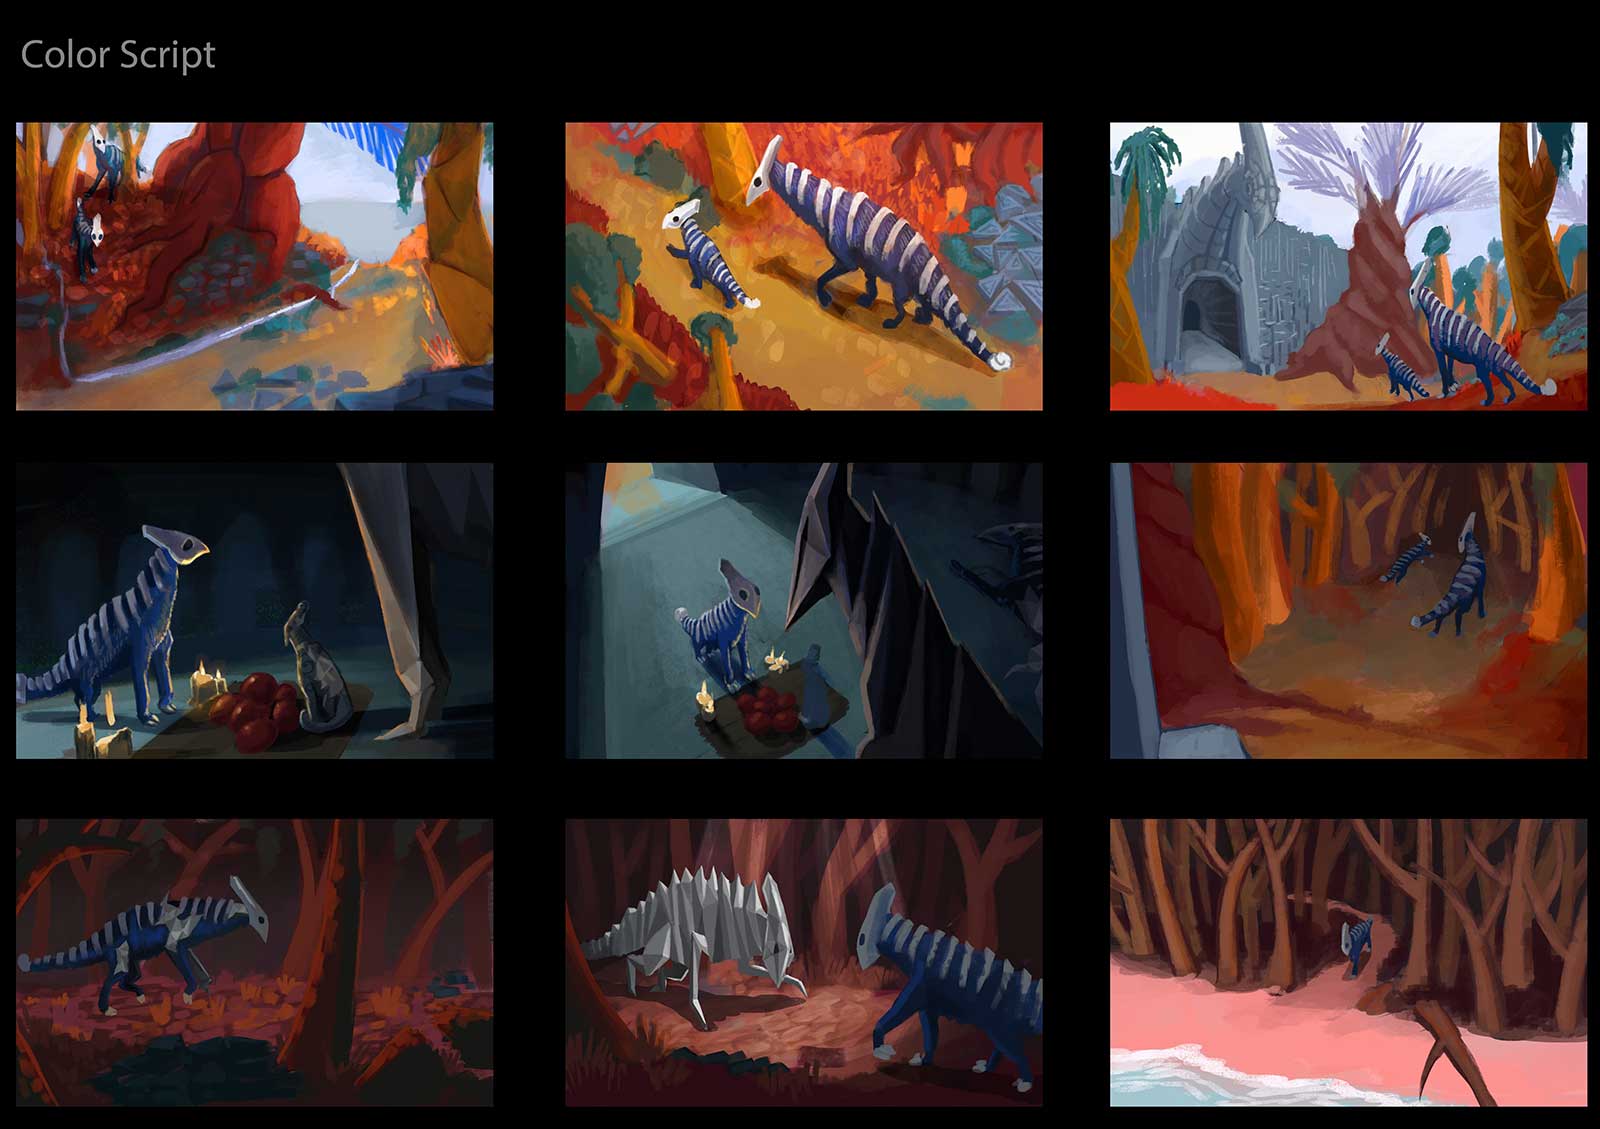 A color script for a film sequence about four-legged fantasy creatures. 